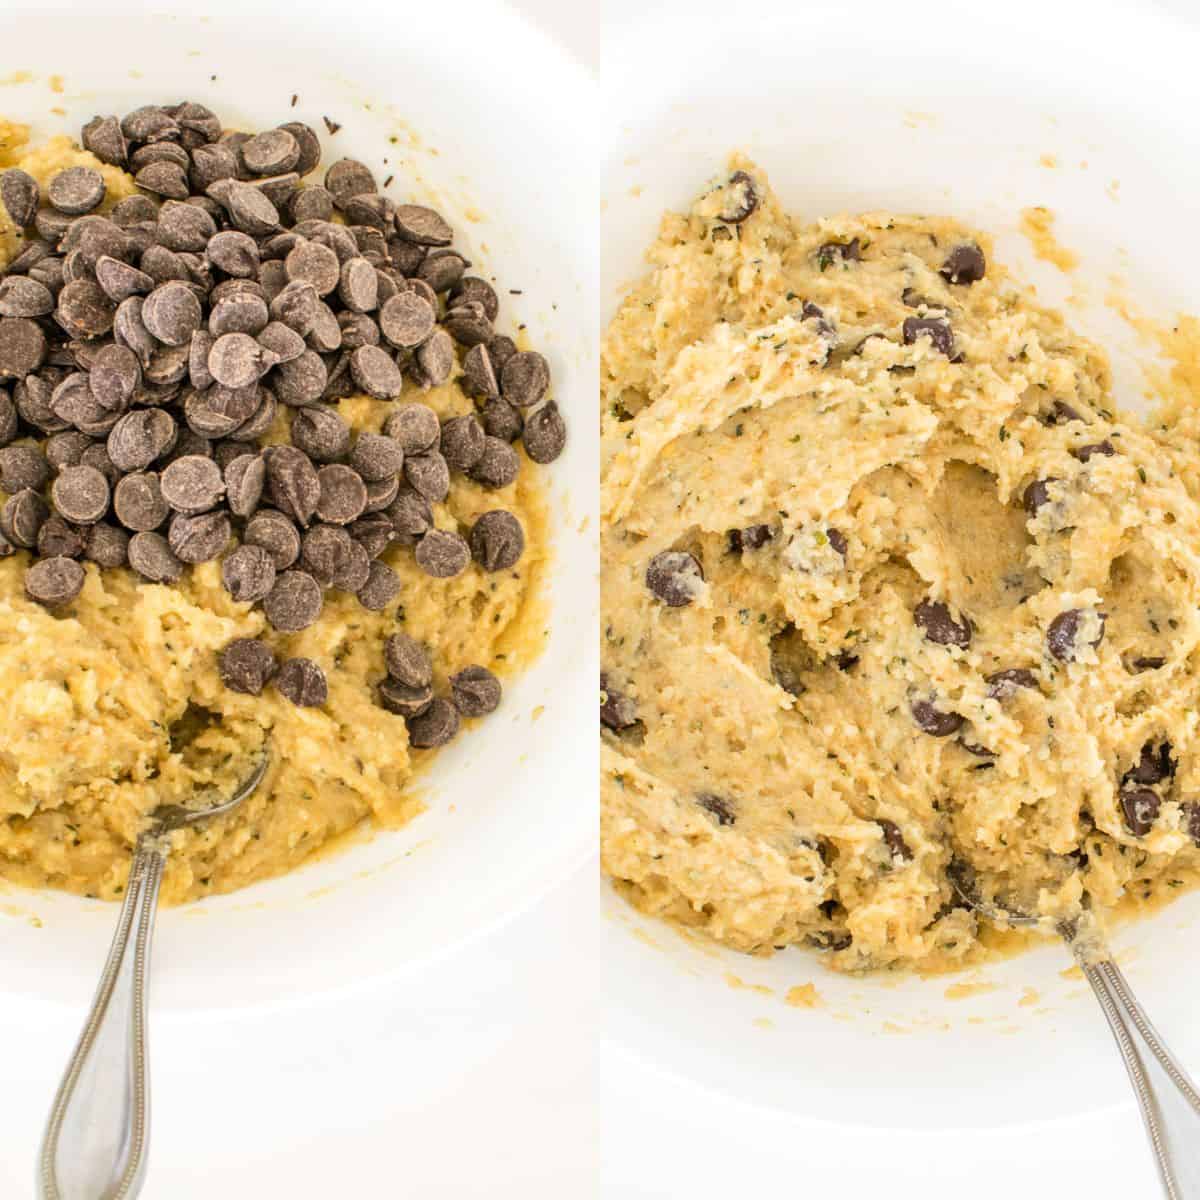 chocolate chips folded into the batter and whipped into a final batter.